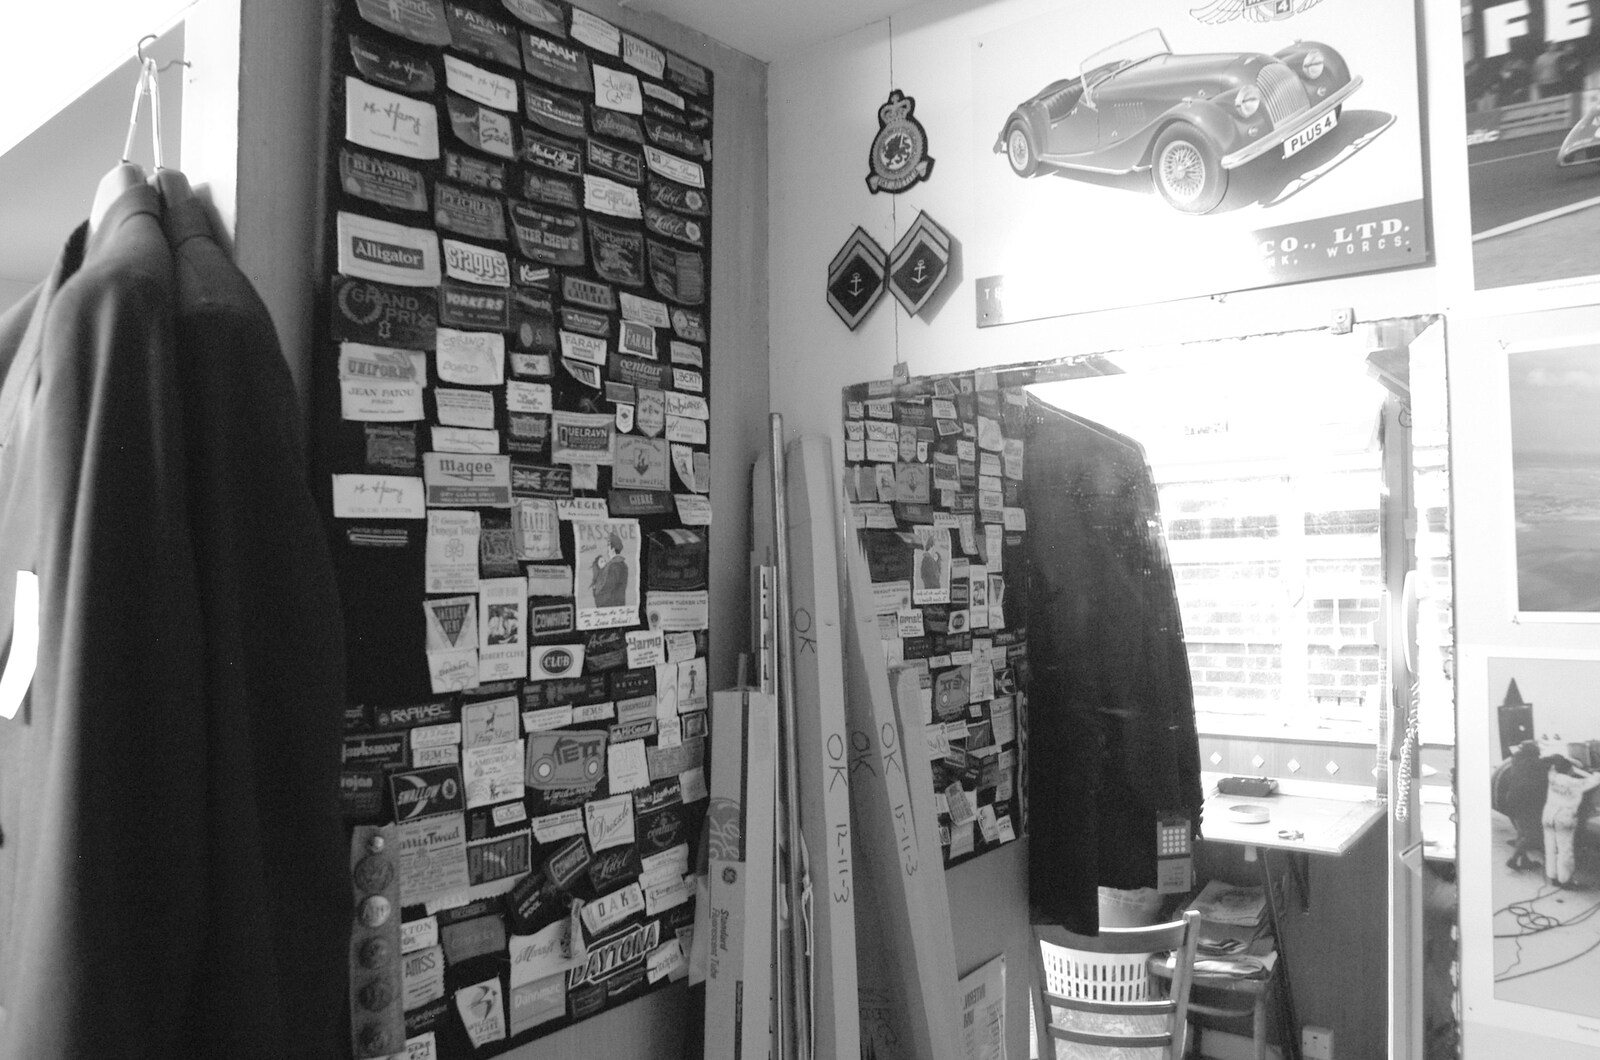 A ton of business cards from A Portrait of Hopgoods: Gentlemen's Outfitters, Diss, Norfolk - 4th January 2006